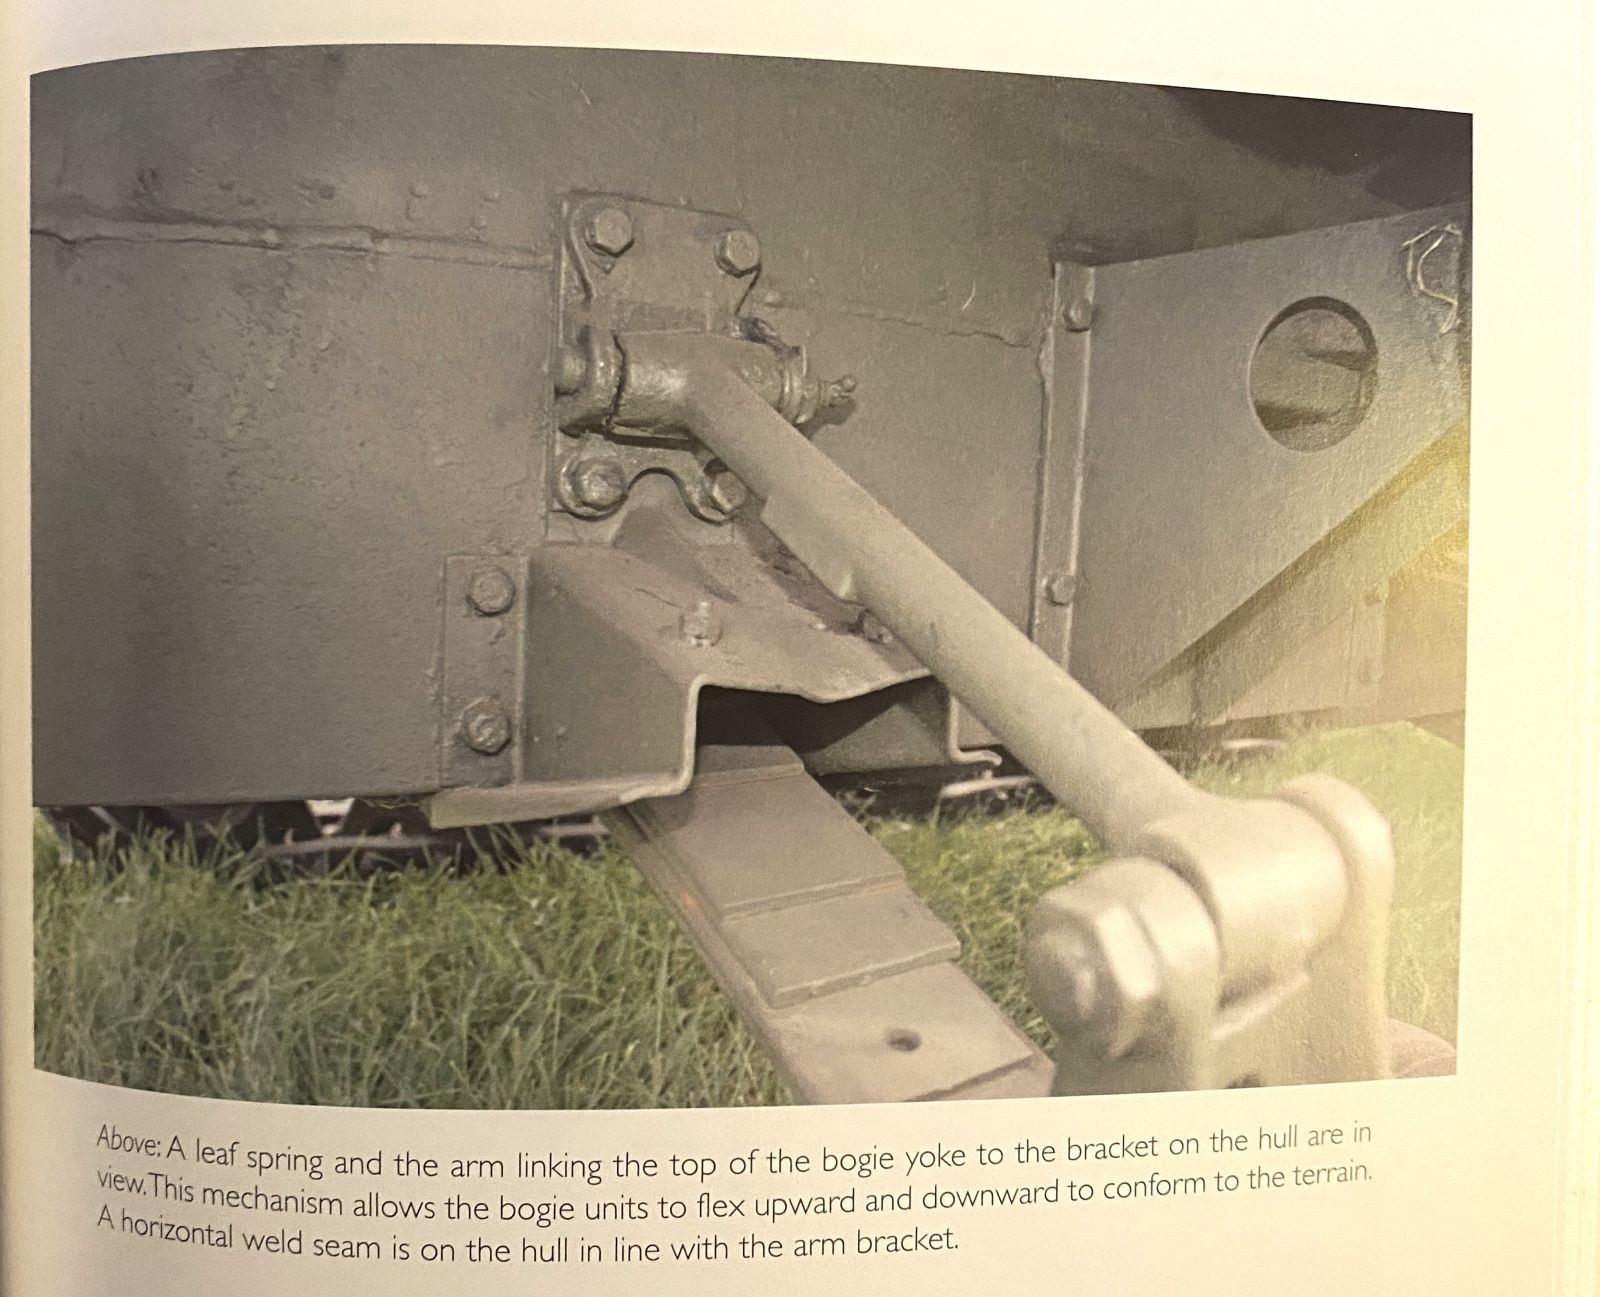 P. 57: leaf spring and the arm linking the top of the bogie yoke to the bracket on the hull.